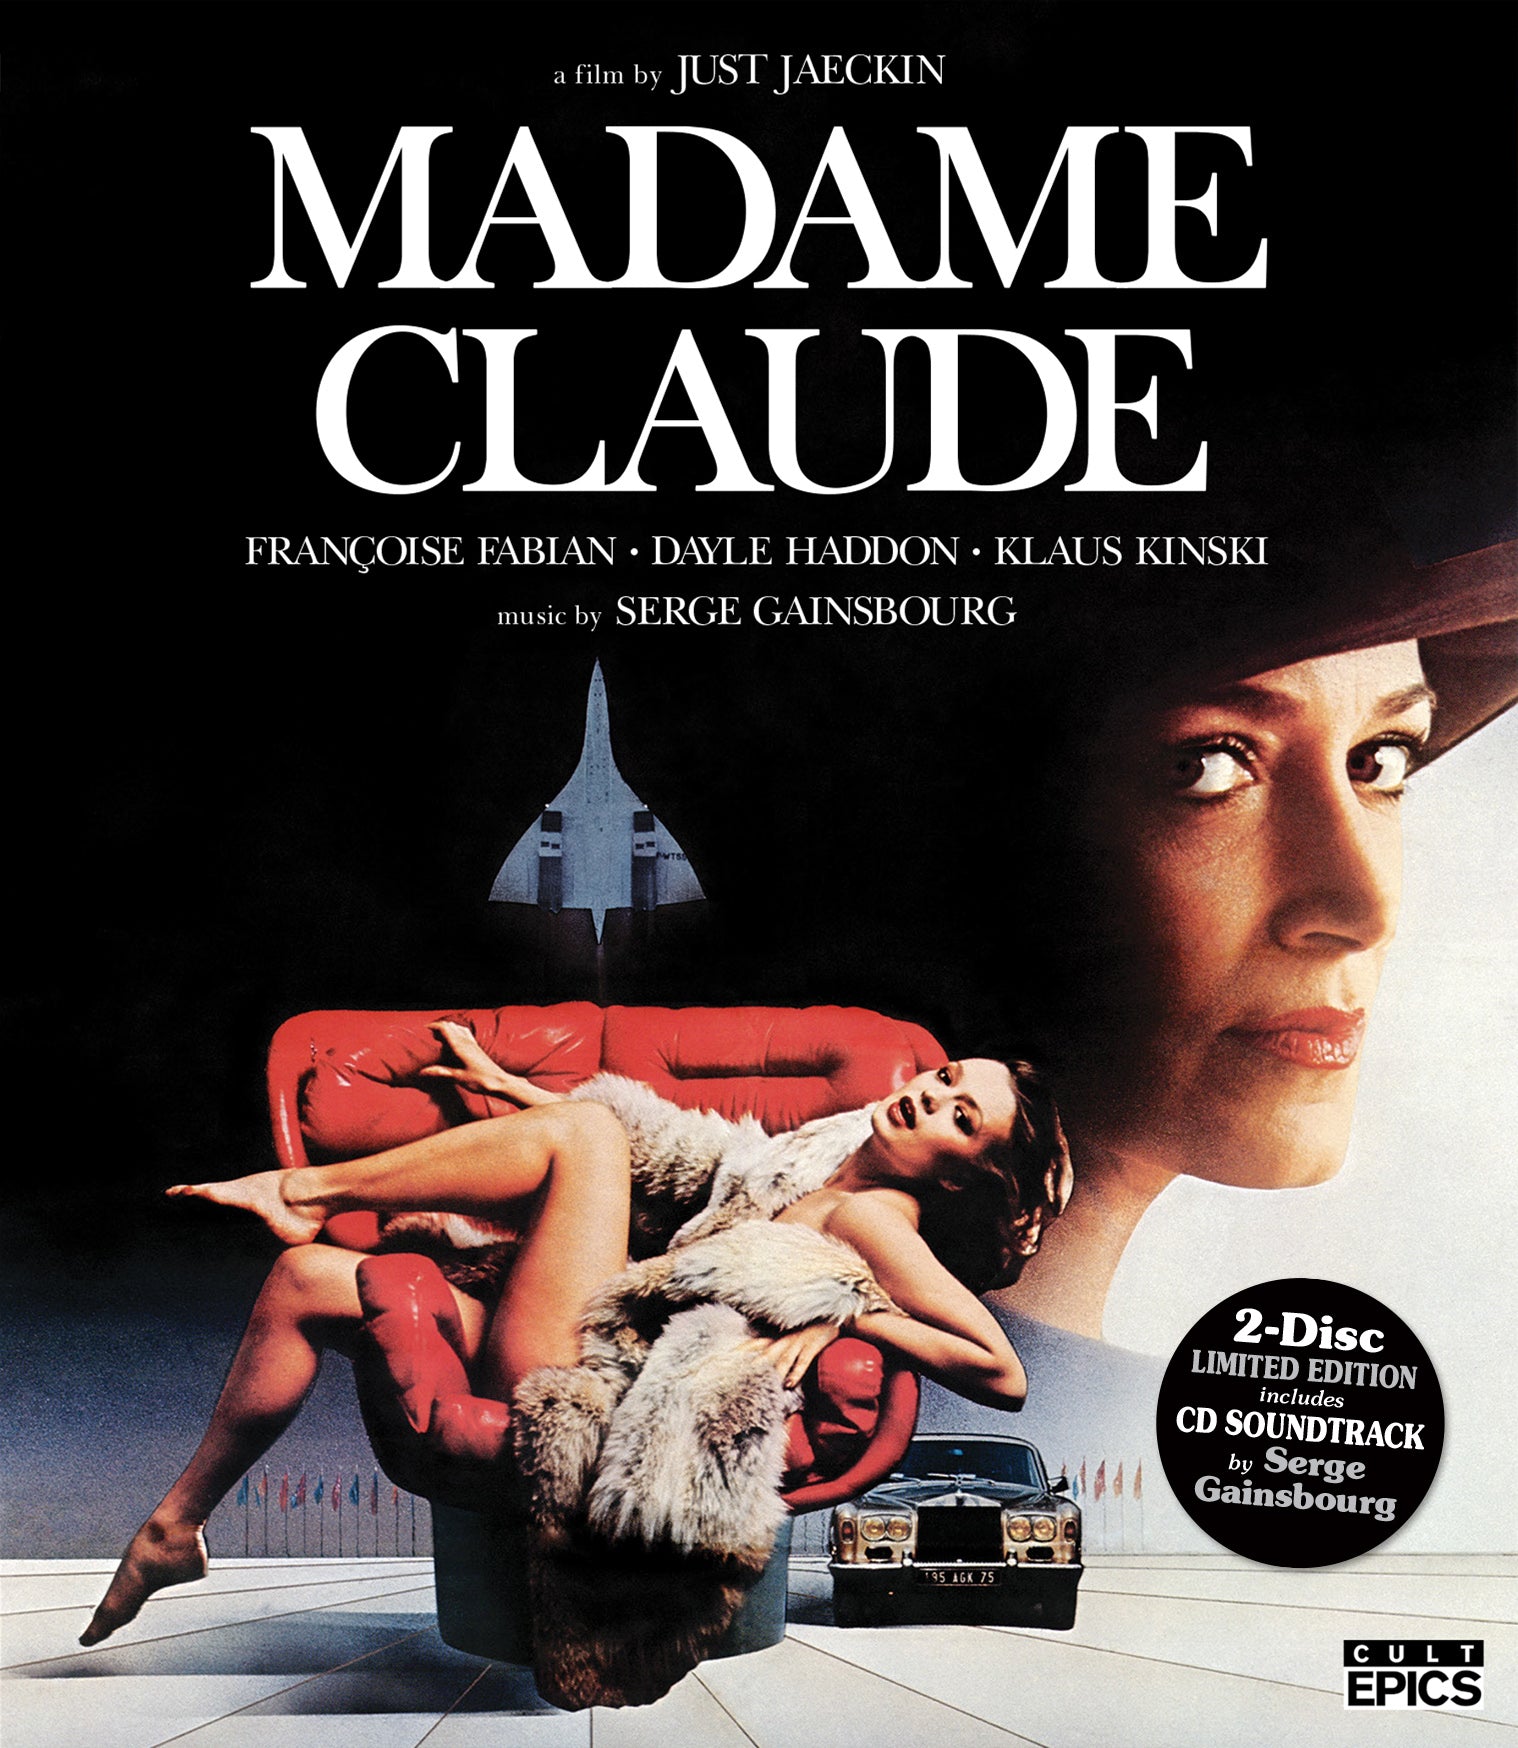 MADAME CLAUDE (2-DISC LIMITED EDITION) BLU-RAY/CD